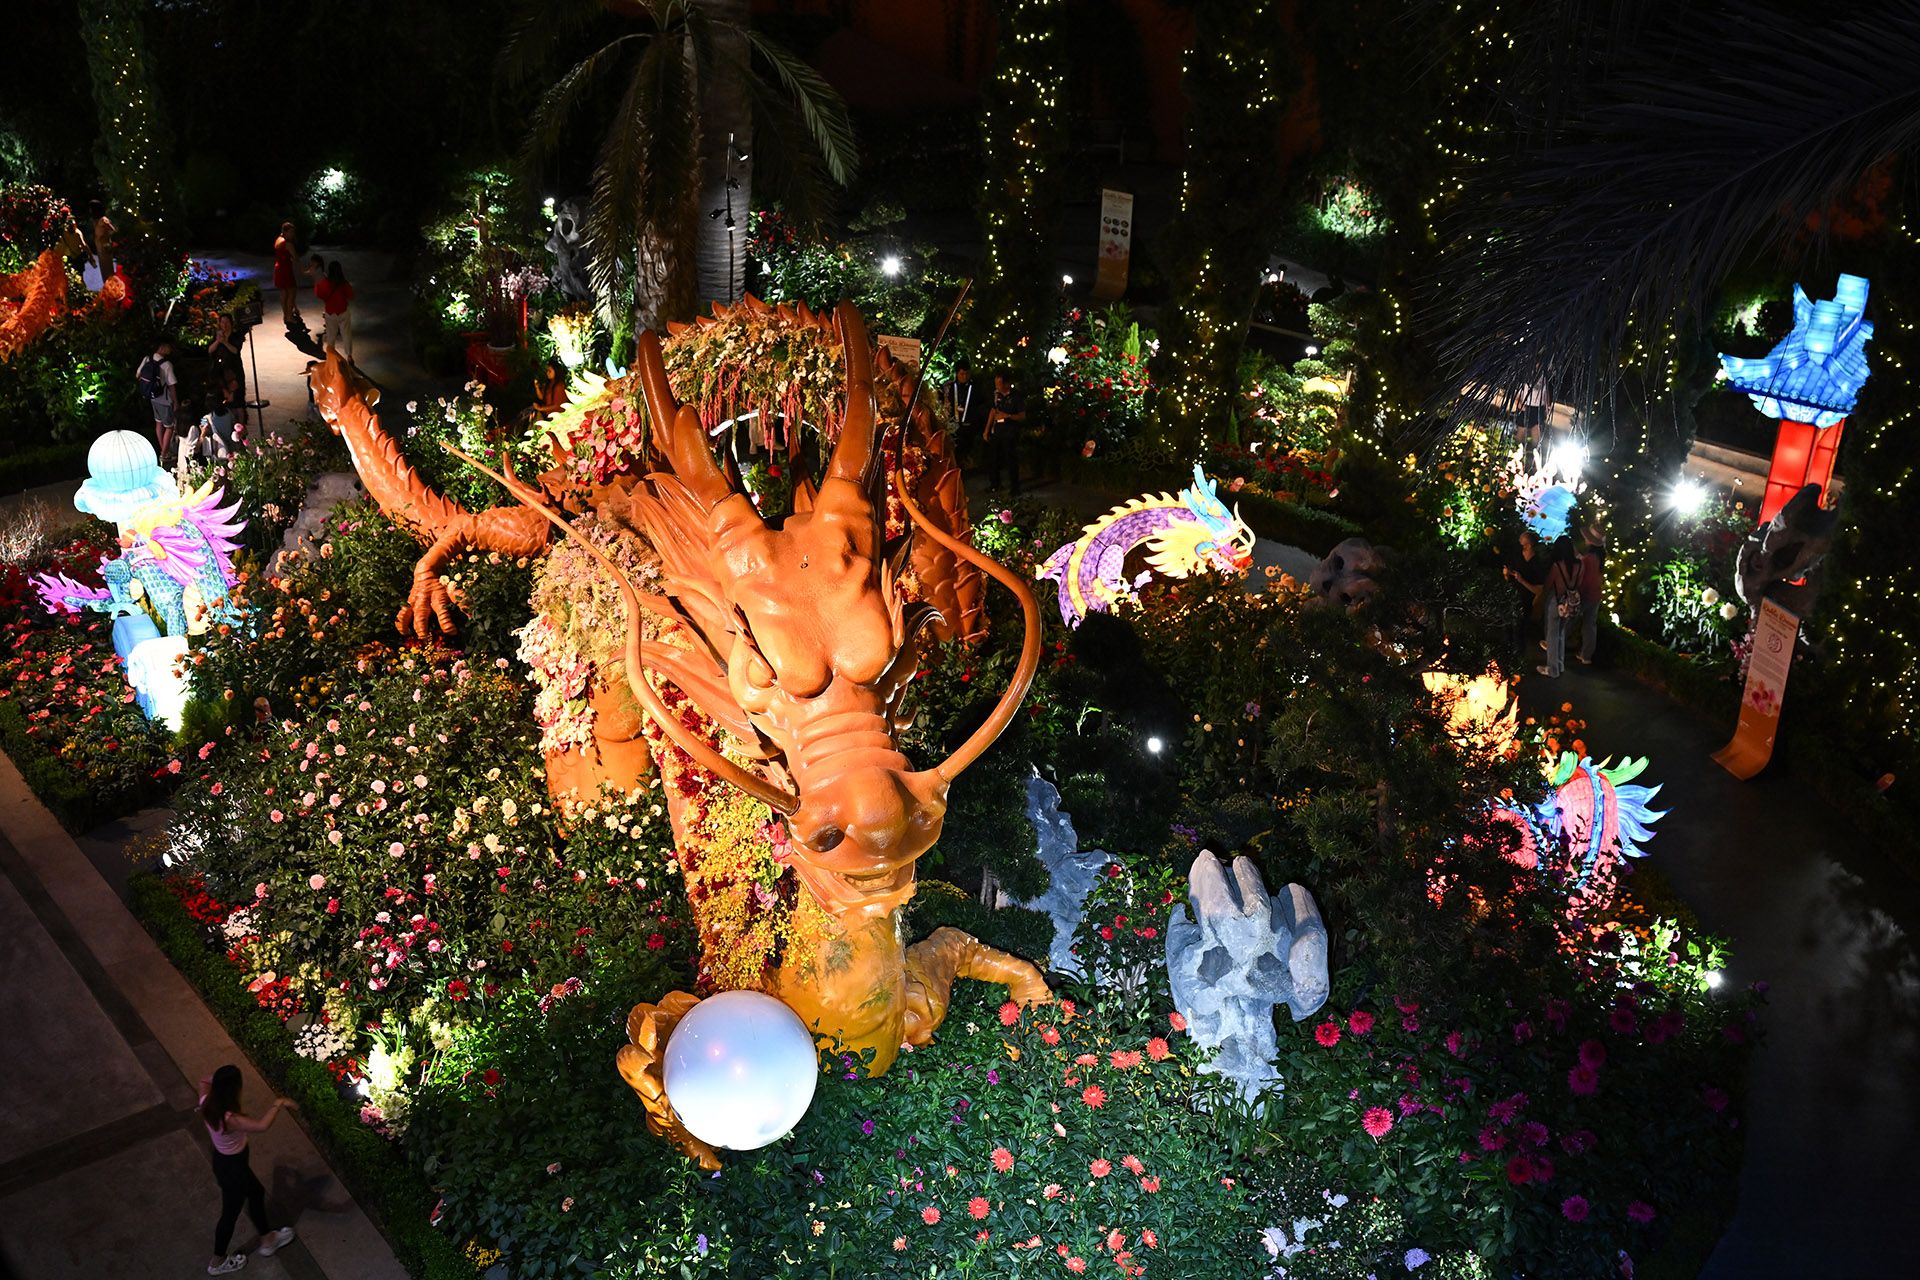 In commemoration of the Year of the Wood Dragon, a 7m-tall dragon that reaches the height of two storey and stretches 15m takes pride of place amid 1,000 dahlias of 40 varieties in the centre of the Flower Dome. ST PHOTO: LIM YAOHUI